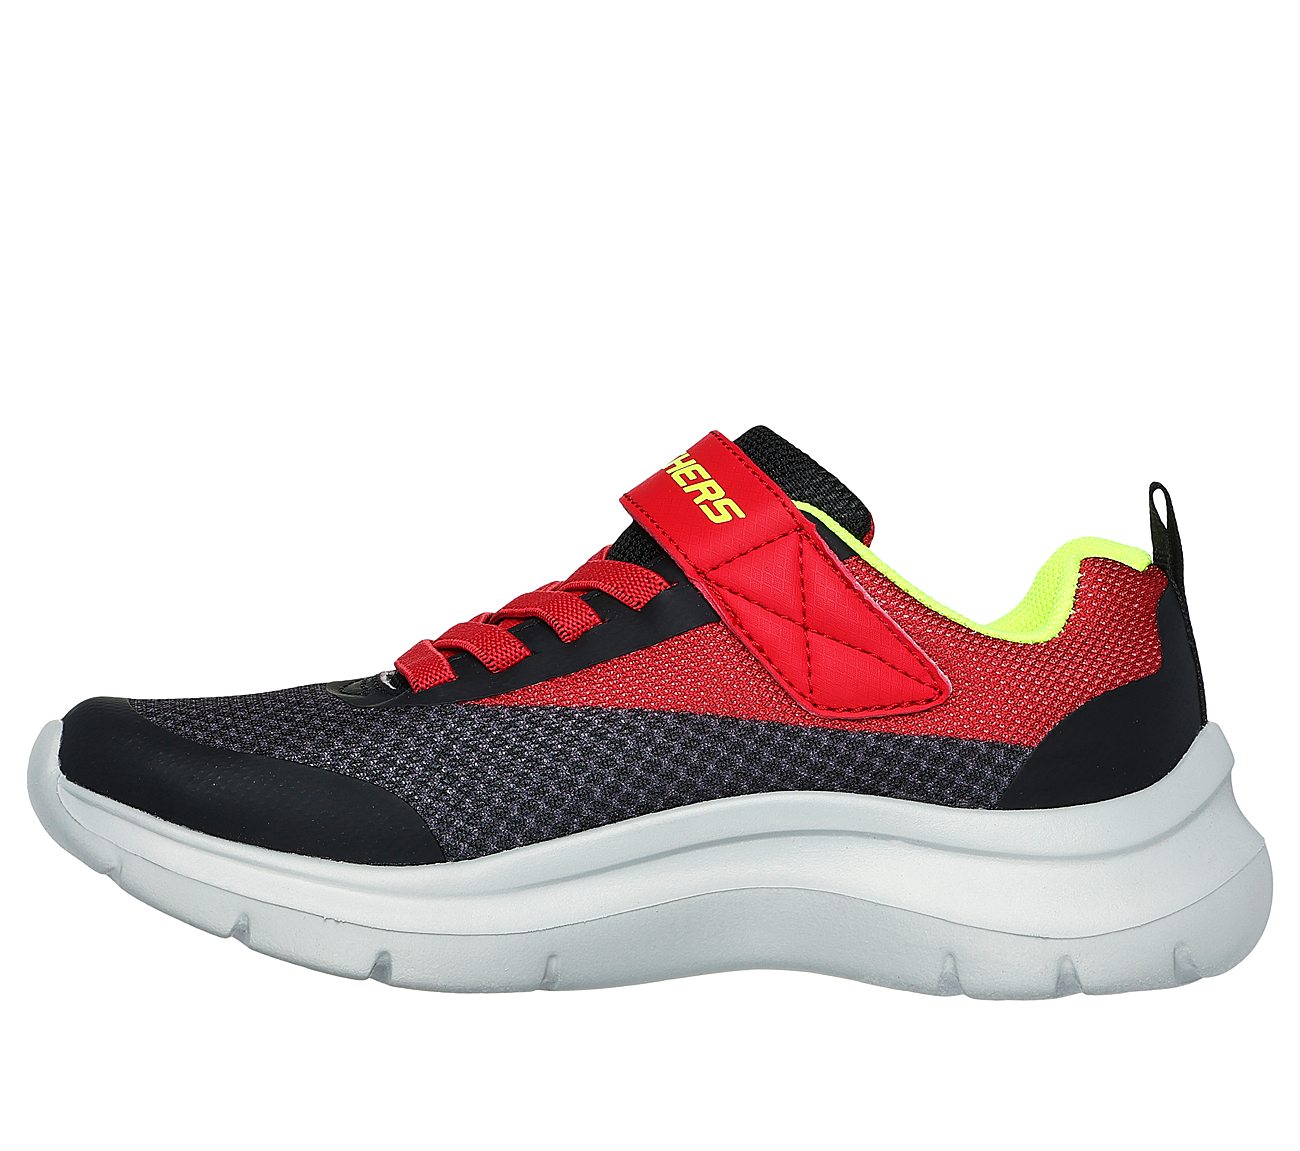 SKECH FAST - SOLAR-SQUAD, RED/BLACK Footwear Left View